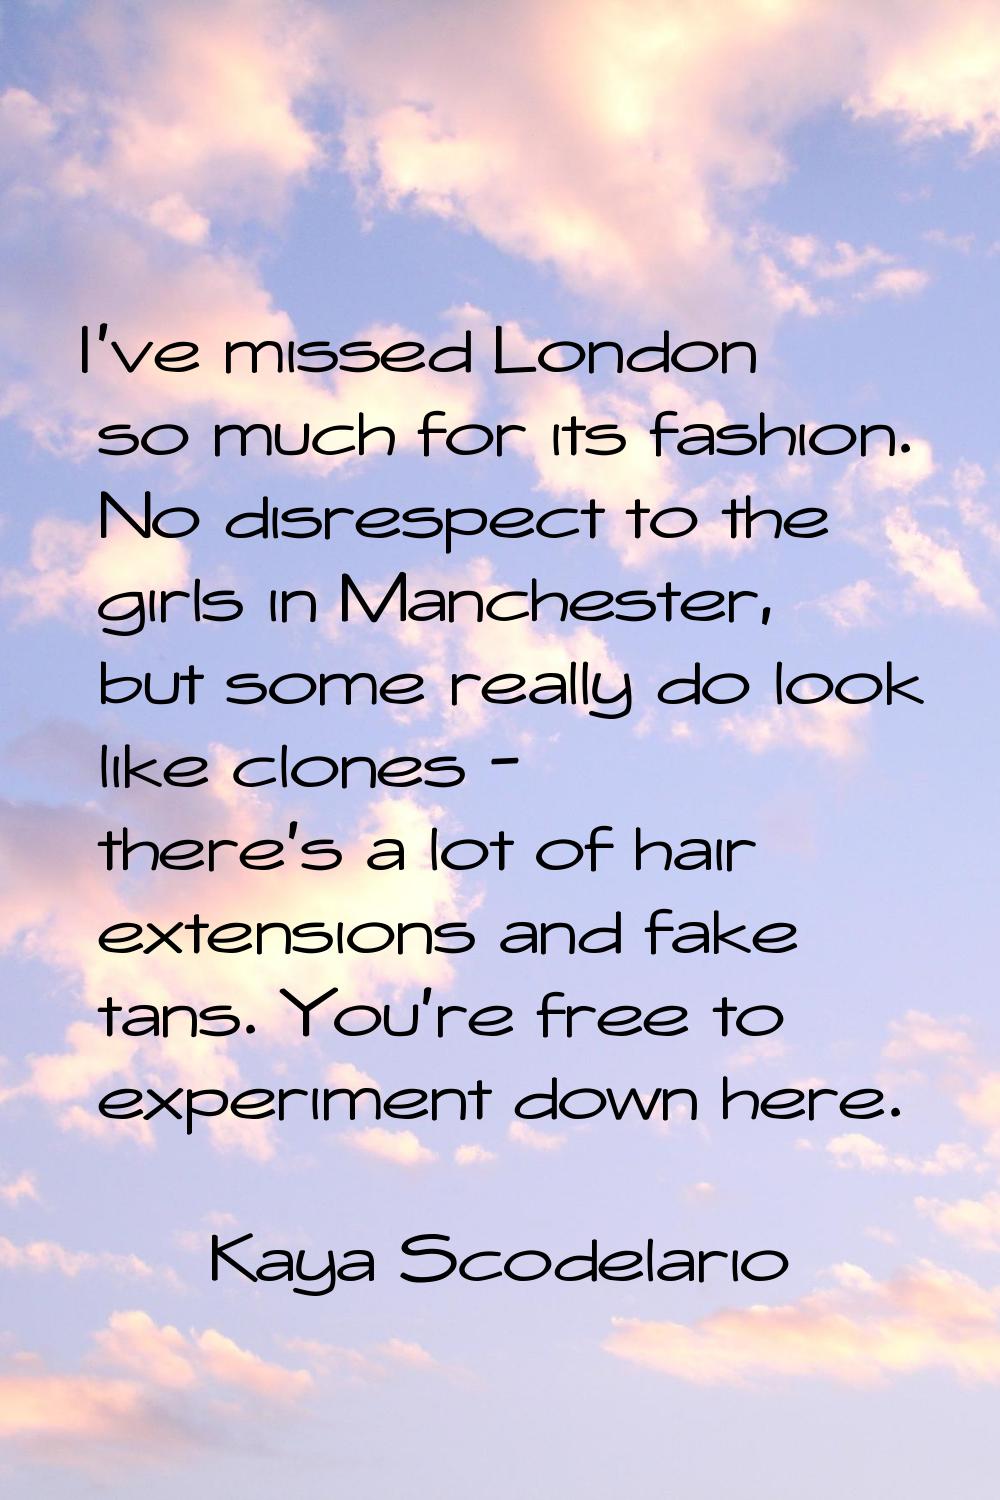 I've missed London so much for its fashion. No disrespect to the girls in Manchester, but some real